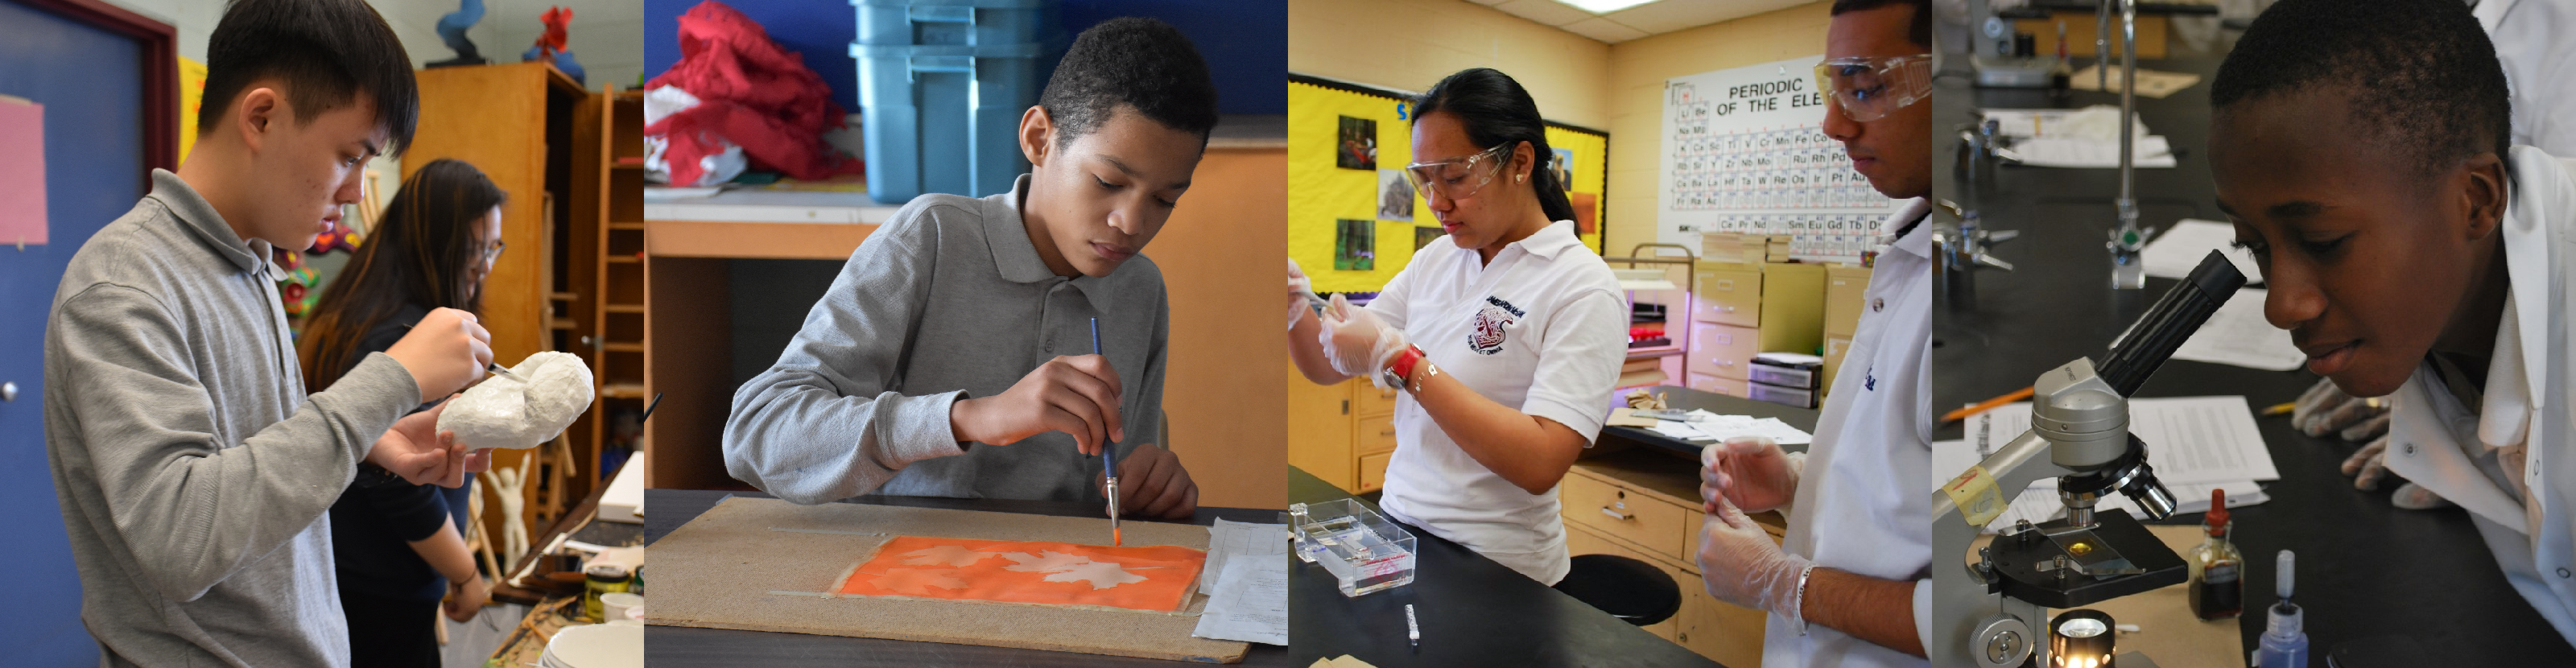 Four photos of students in uniform in art and science classes.